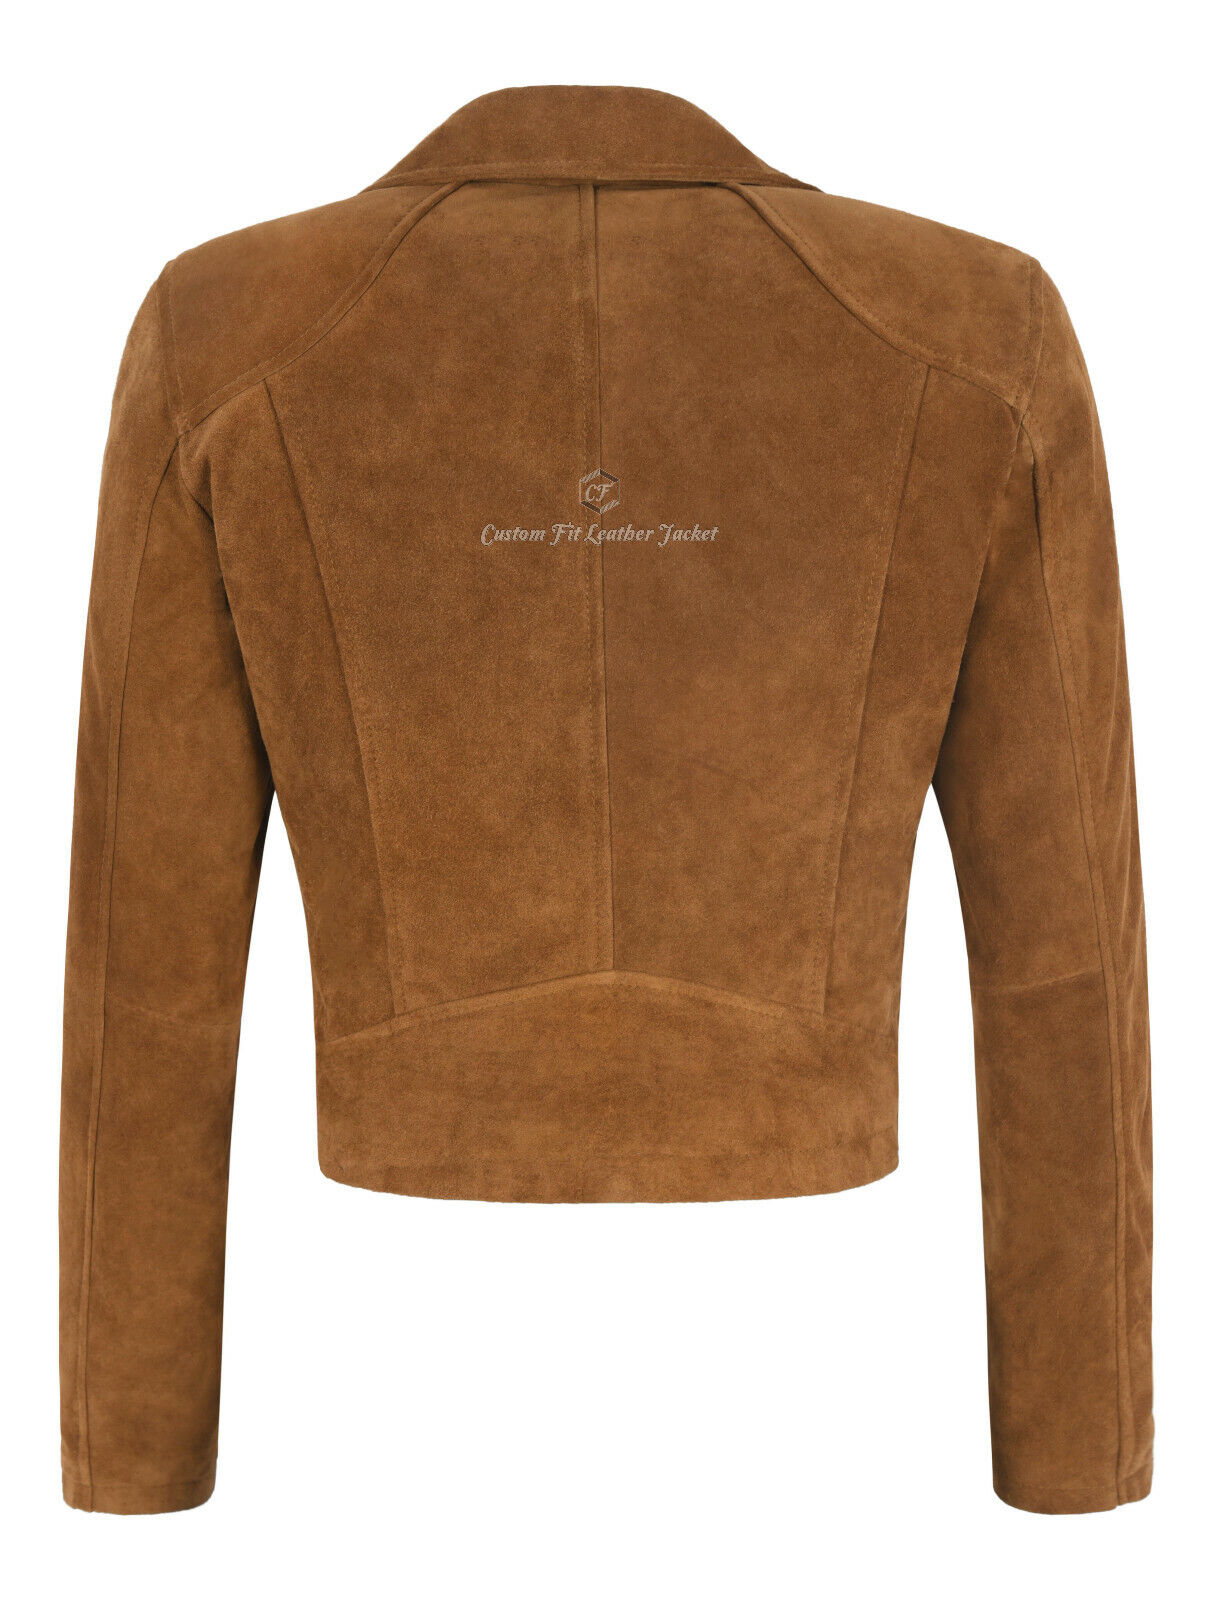 Ladies SHORT BODY Jacket Classic Suede Leather Fashion Casual Biker Style Jacket 100% nowy, popularny